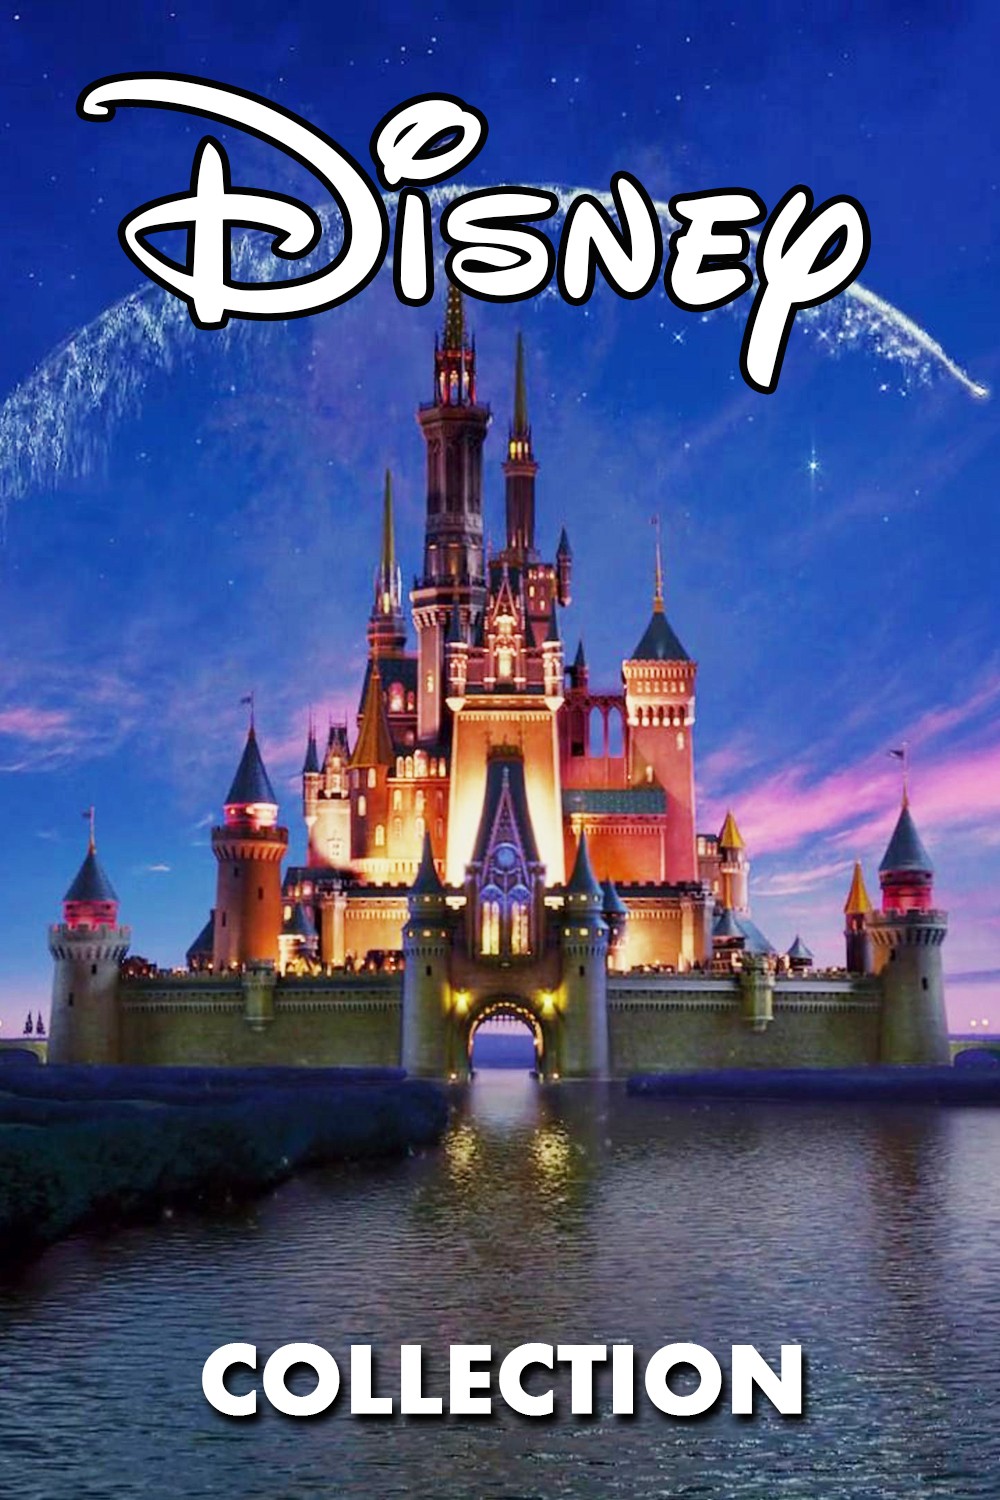 disney-collection-poster-1-plex-collection-posters